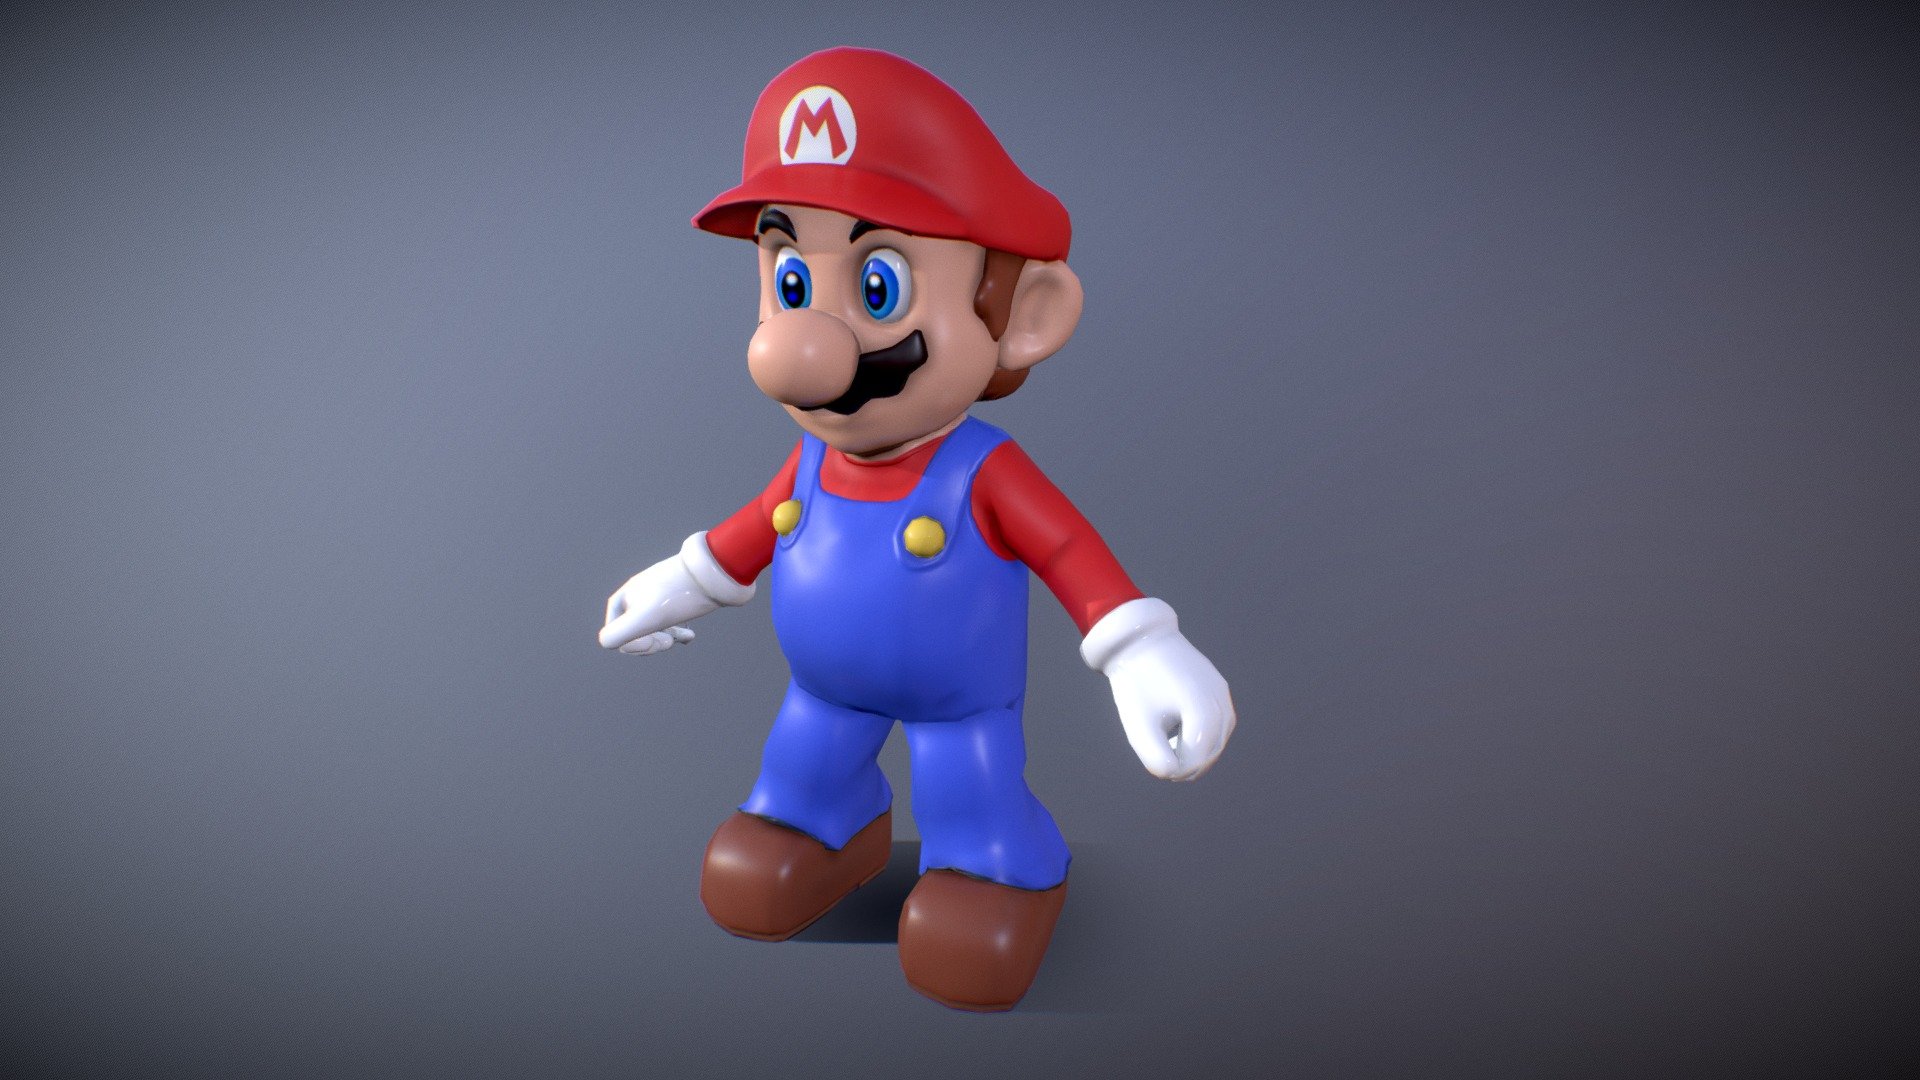 First time sculpting a character. I used 3D Coat for Sculpting, retopology and UV Mapping. For texturing I used Substance Painter. Animated with 3D Max 3d model